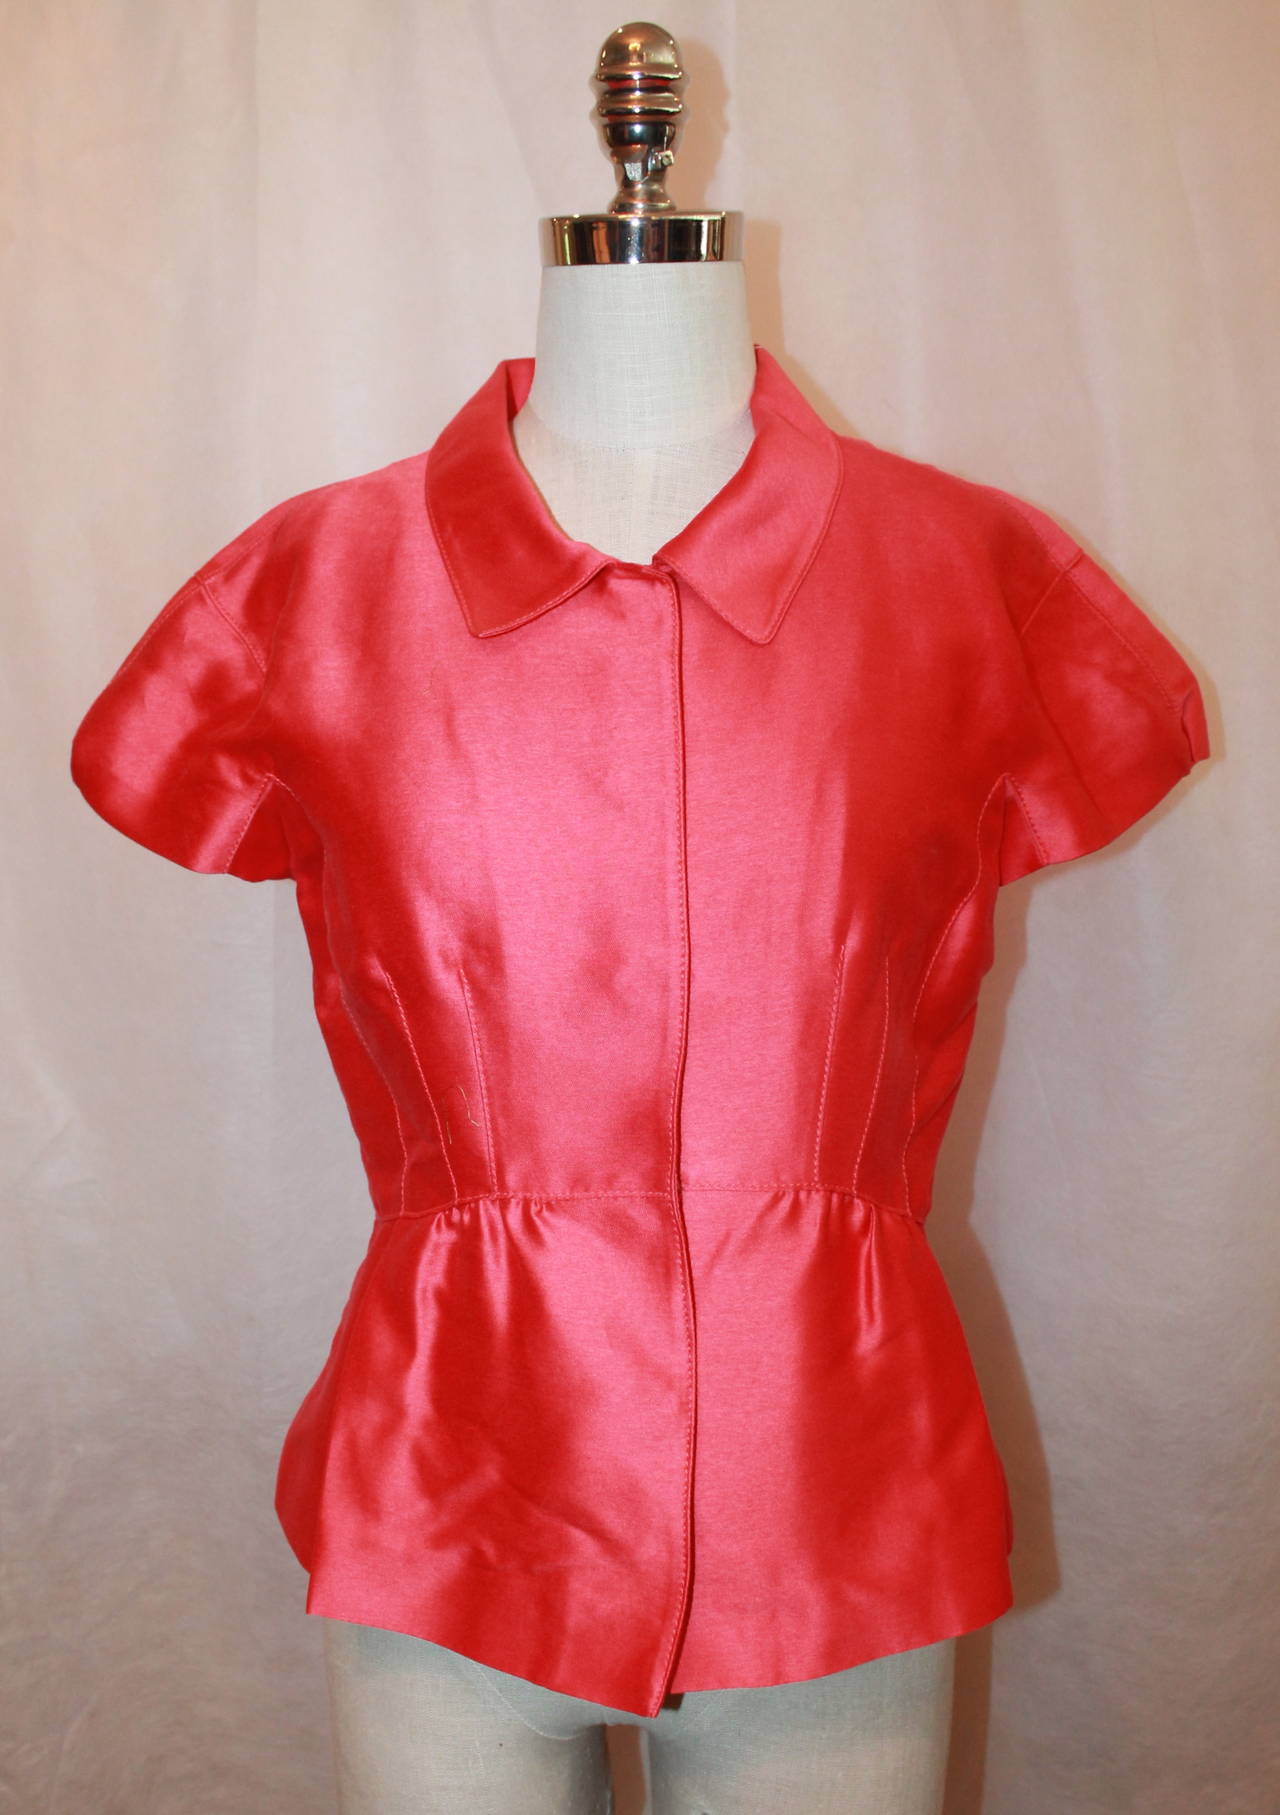 Oscar De La Renta Size 6 Red/Orange Silk Top with Cap Sleeves and Peplum. Clasps to Open/Close are Goldtone.

Fabric:
Shell: 93 % Cotton; 7 % Silk
Lining: 100 % Silk

Measurements:
Bust: 36 